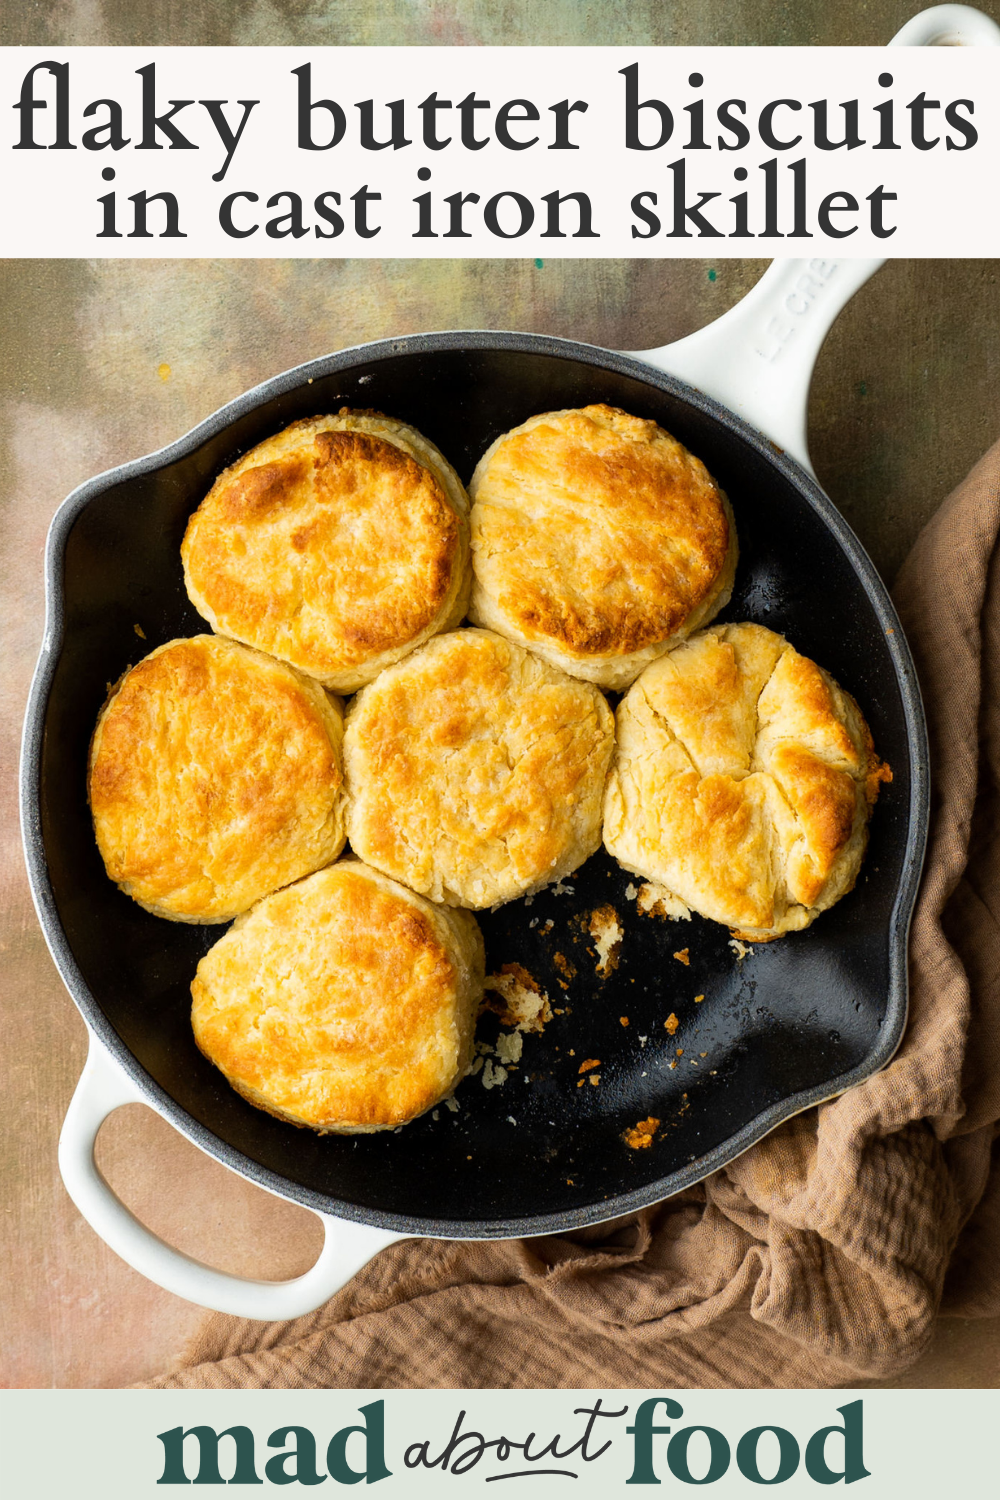 Image for pinning flaky butter biscuit in cast iron skillet recipe